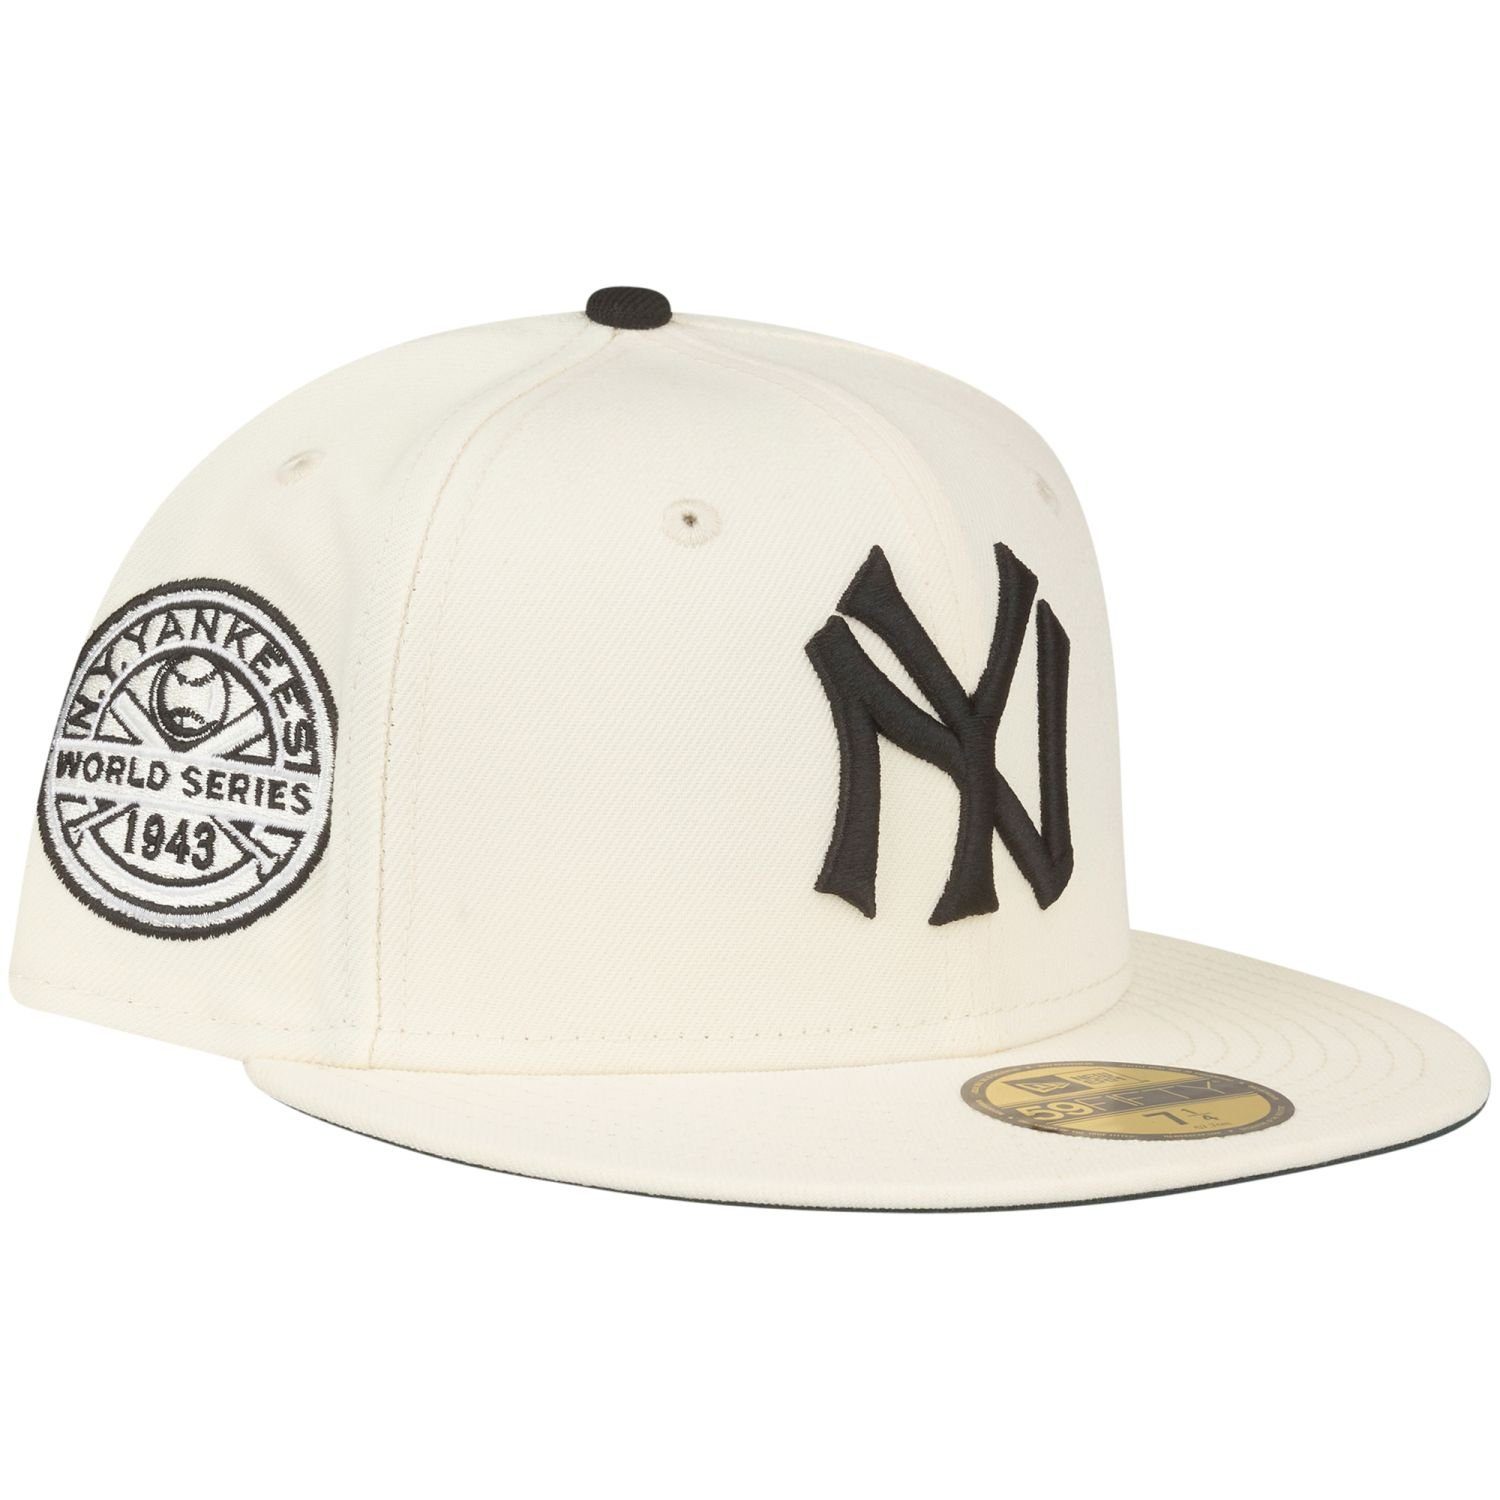 New Era Fitted Cap 59Fifty COOPERSTOWN New York Yankees